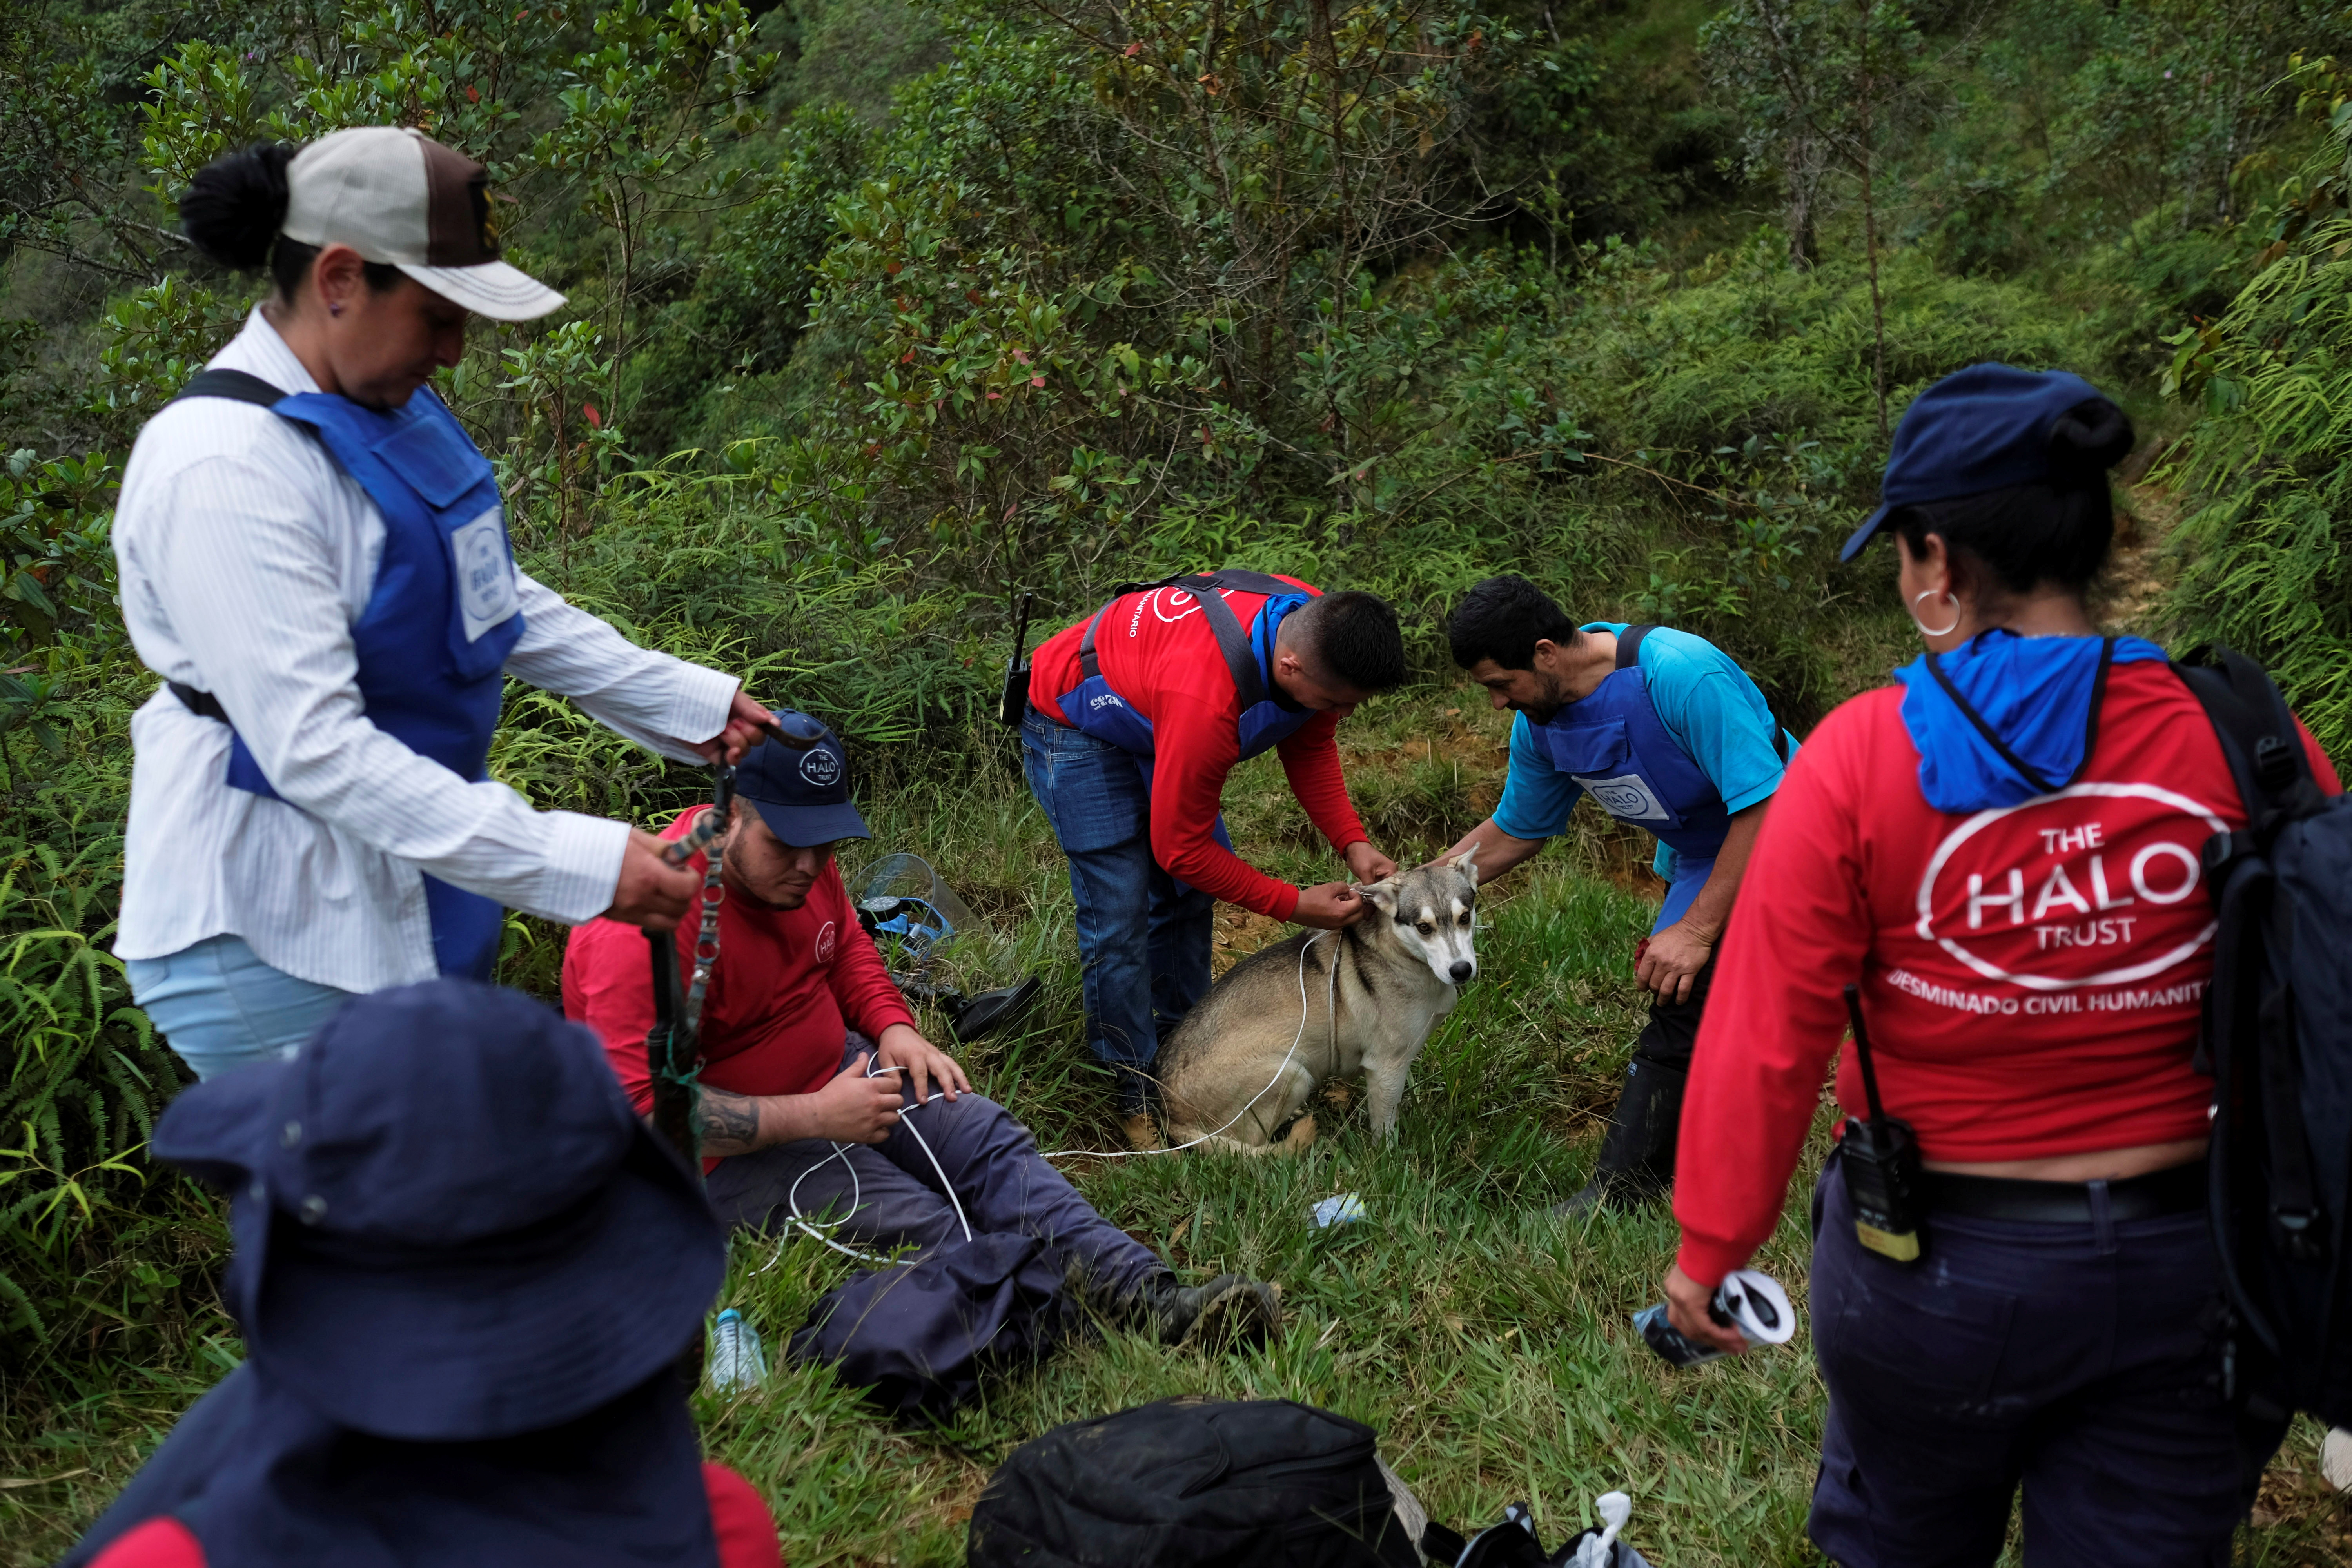 Members of the international landmine clearance charity HALO Trust search areas for landmines, in Carmen de Viboral